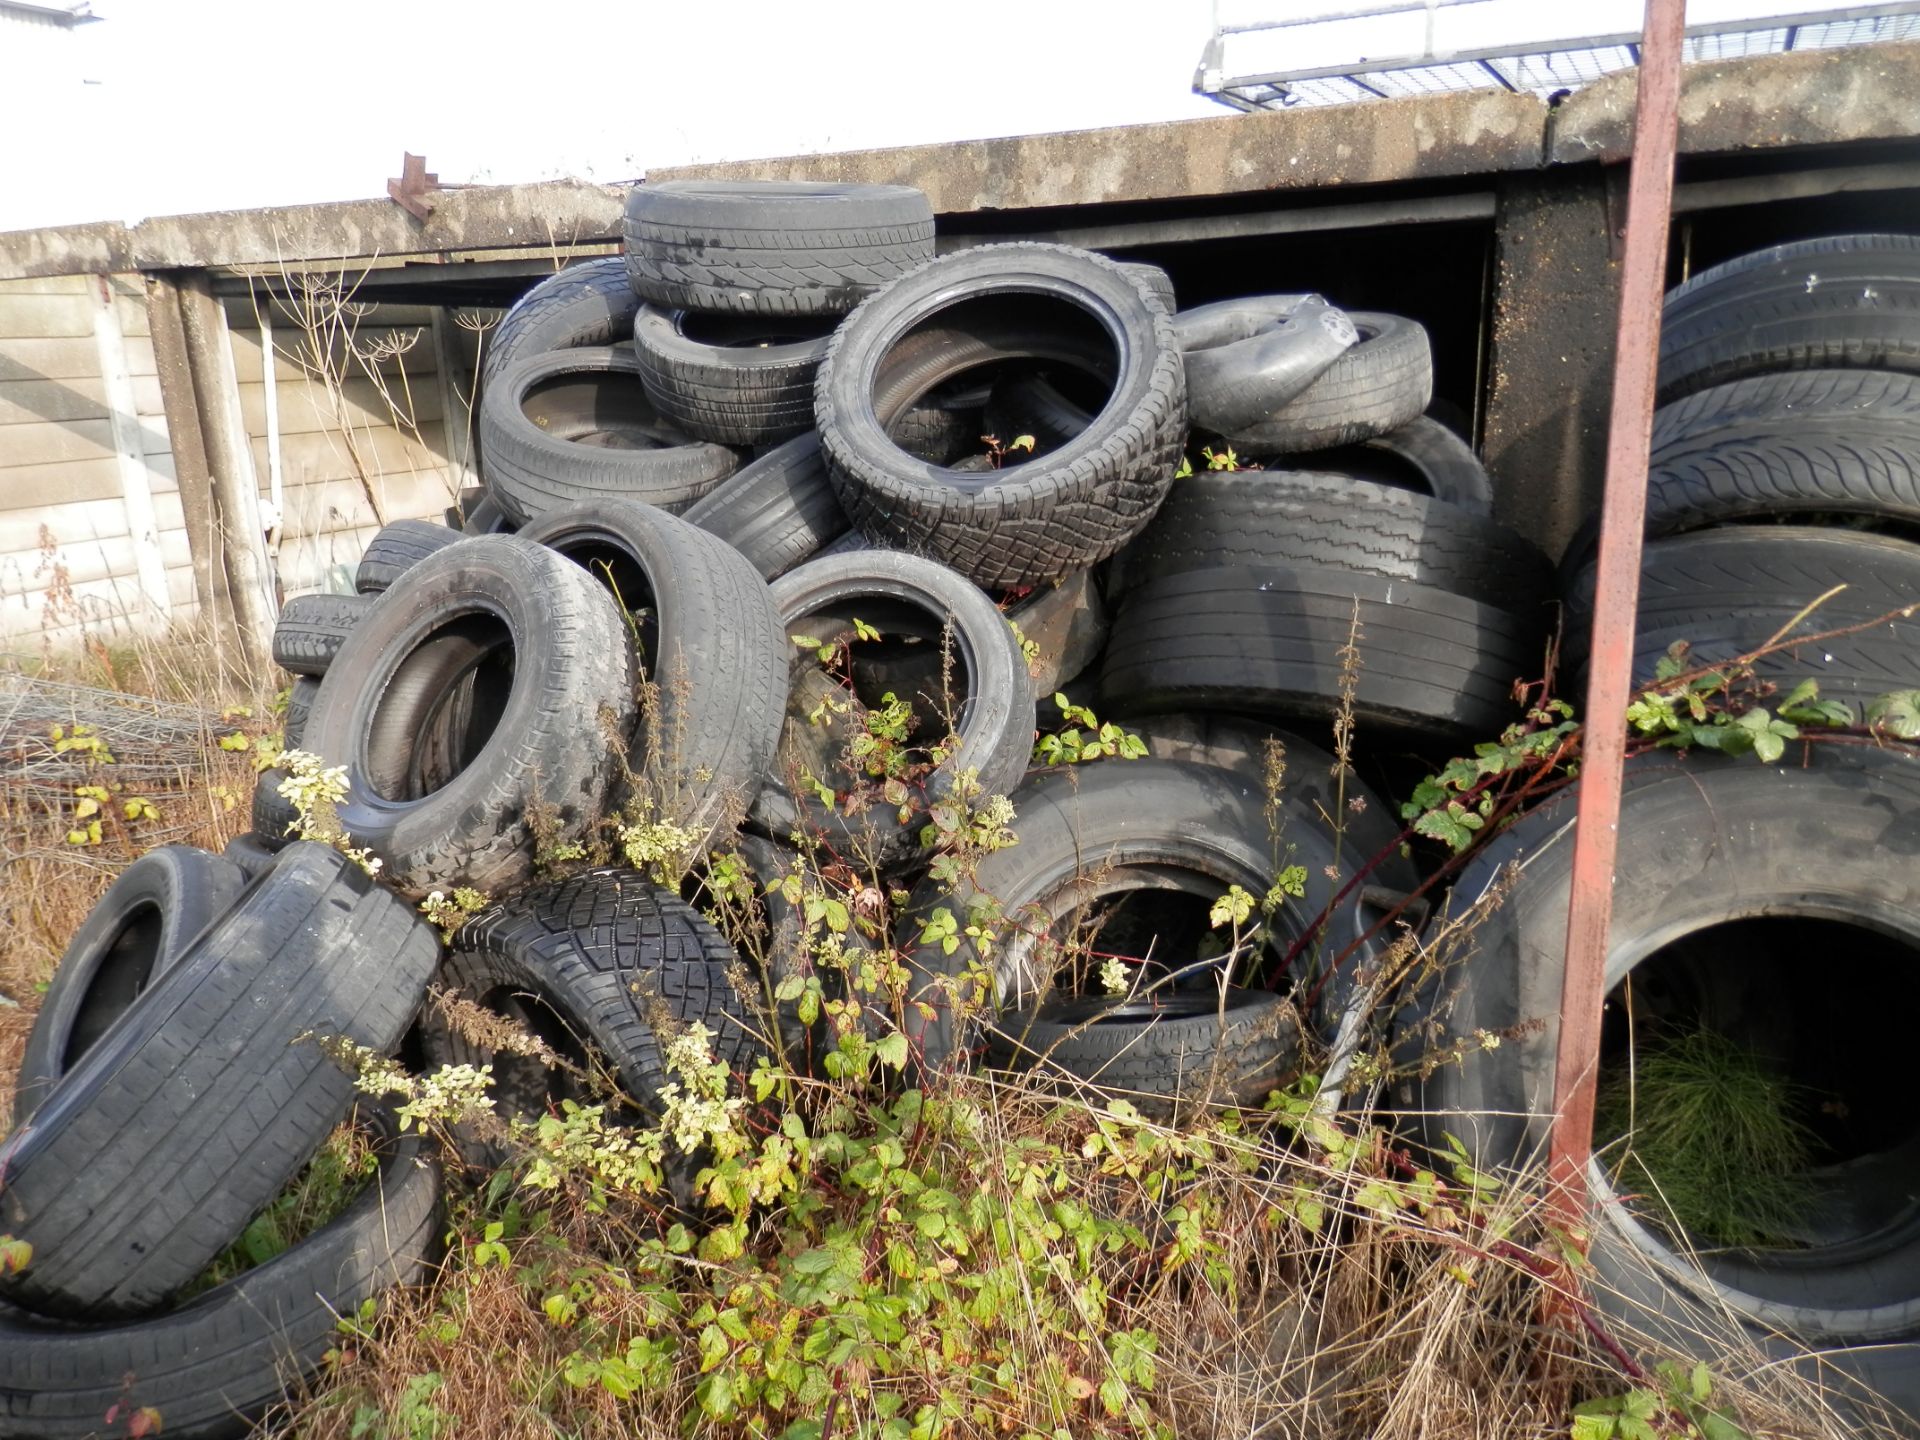 3 CAR GARAGES FULL OF USED, PART WORN TYRES. ASSORTED FROM CAR TO LORRY TYRES. POSSIBLY 800+ £10 !! - Image 2 of 8